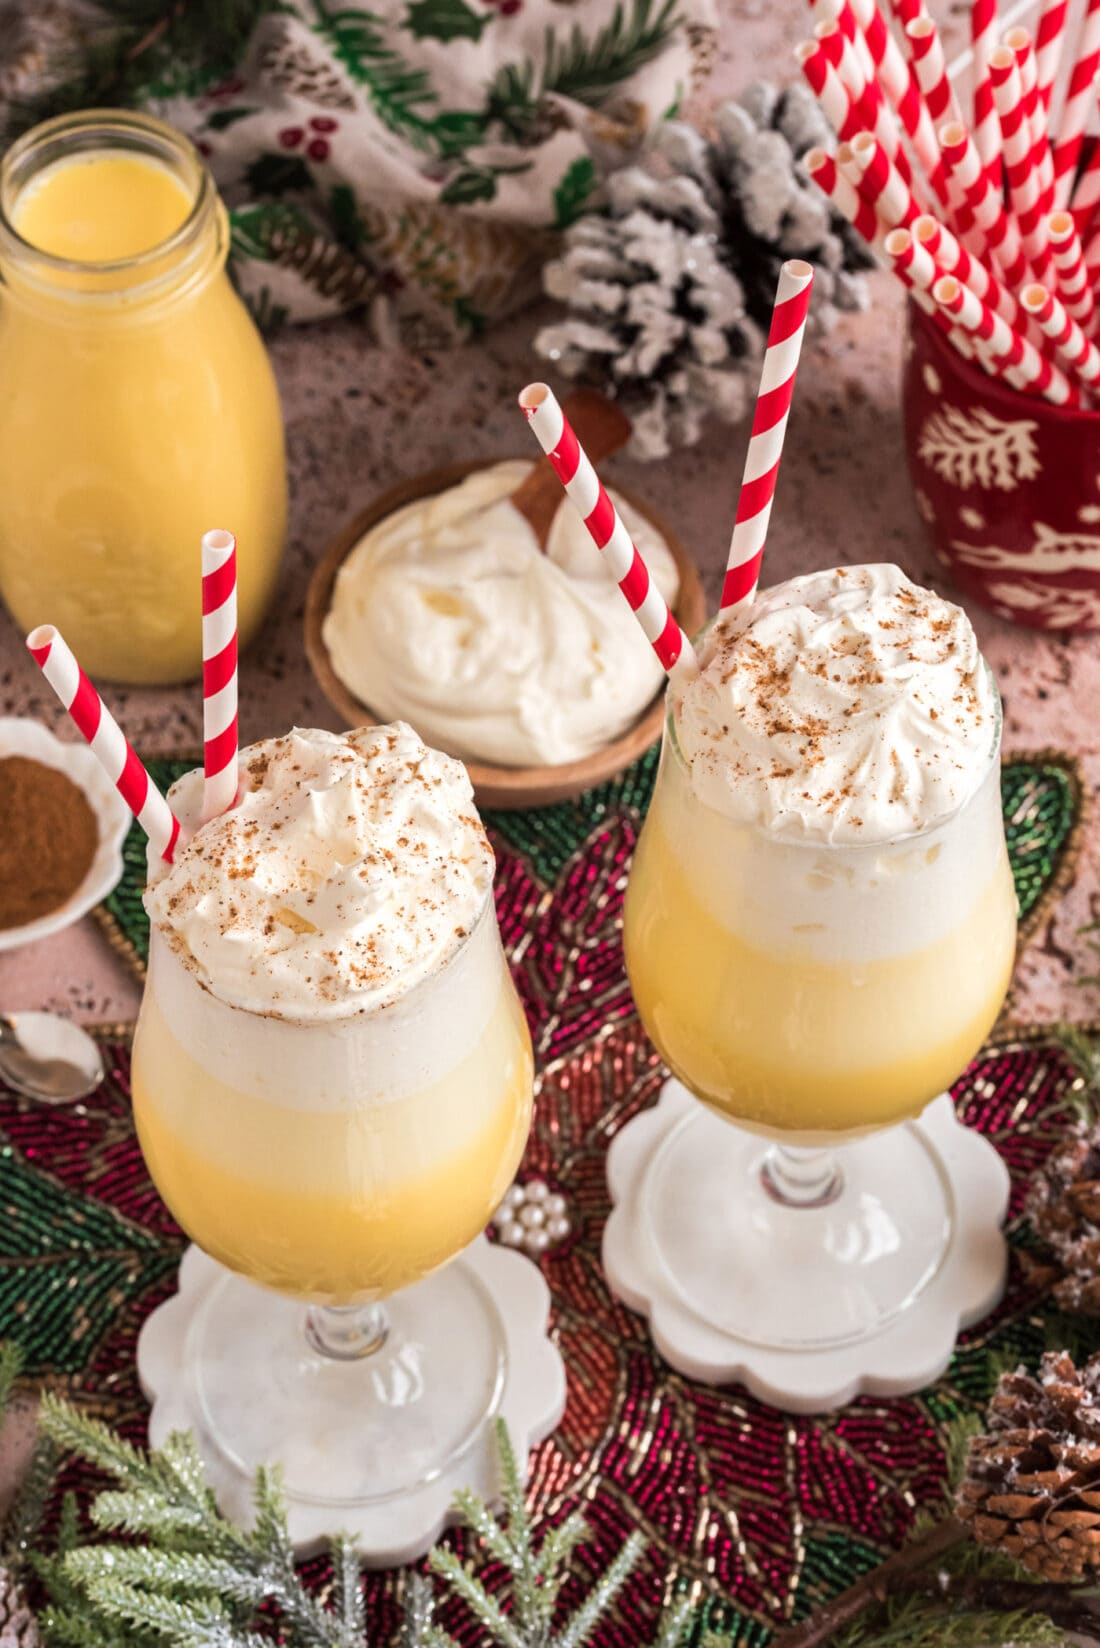 Two Eggnog Floats topped with whipped cream